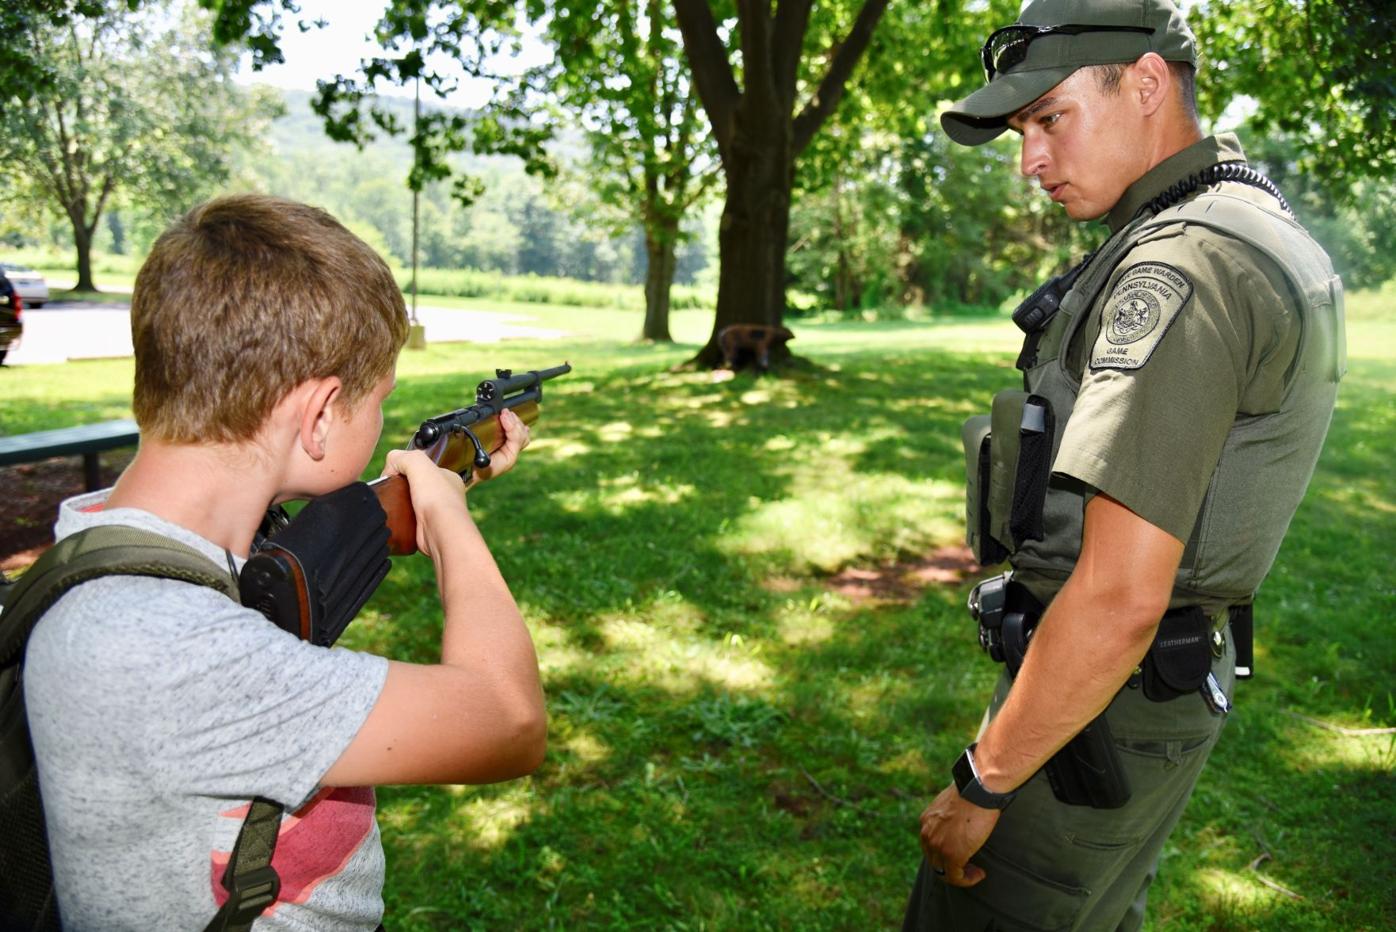 Game Warden Camp Creek teaches youngsters about role of 'thin